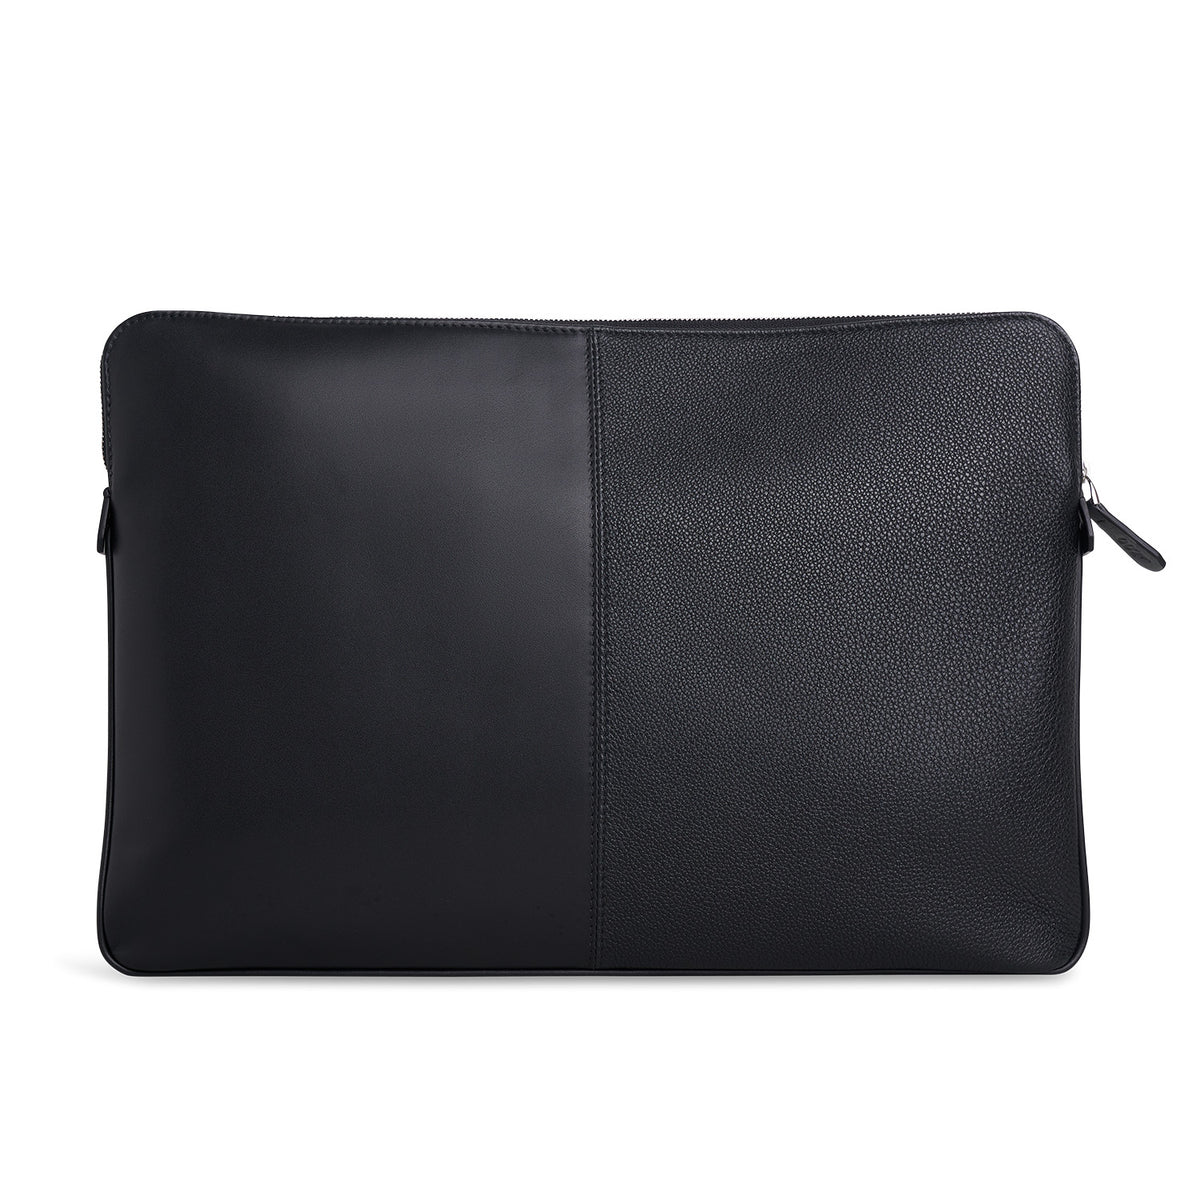 James Bond Leather Laptop Sleeve - By Connolly